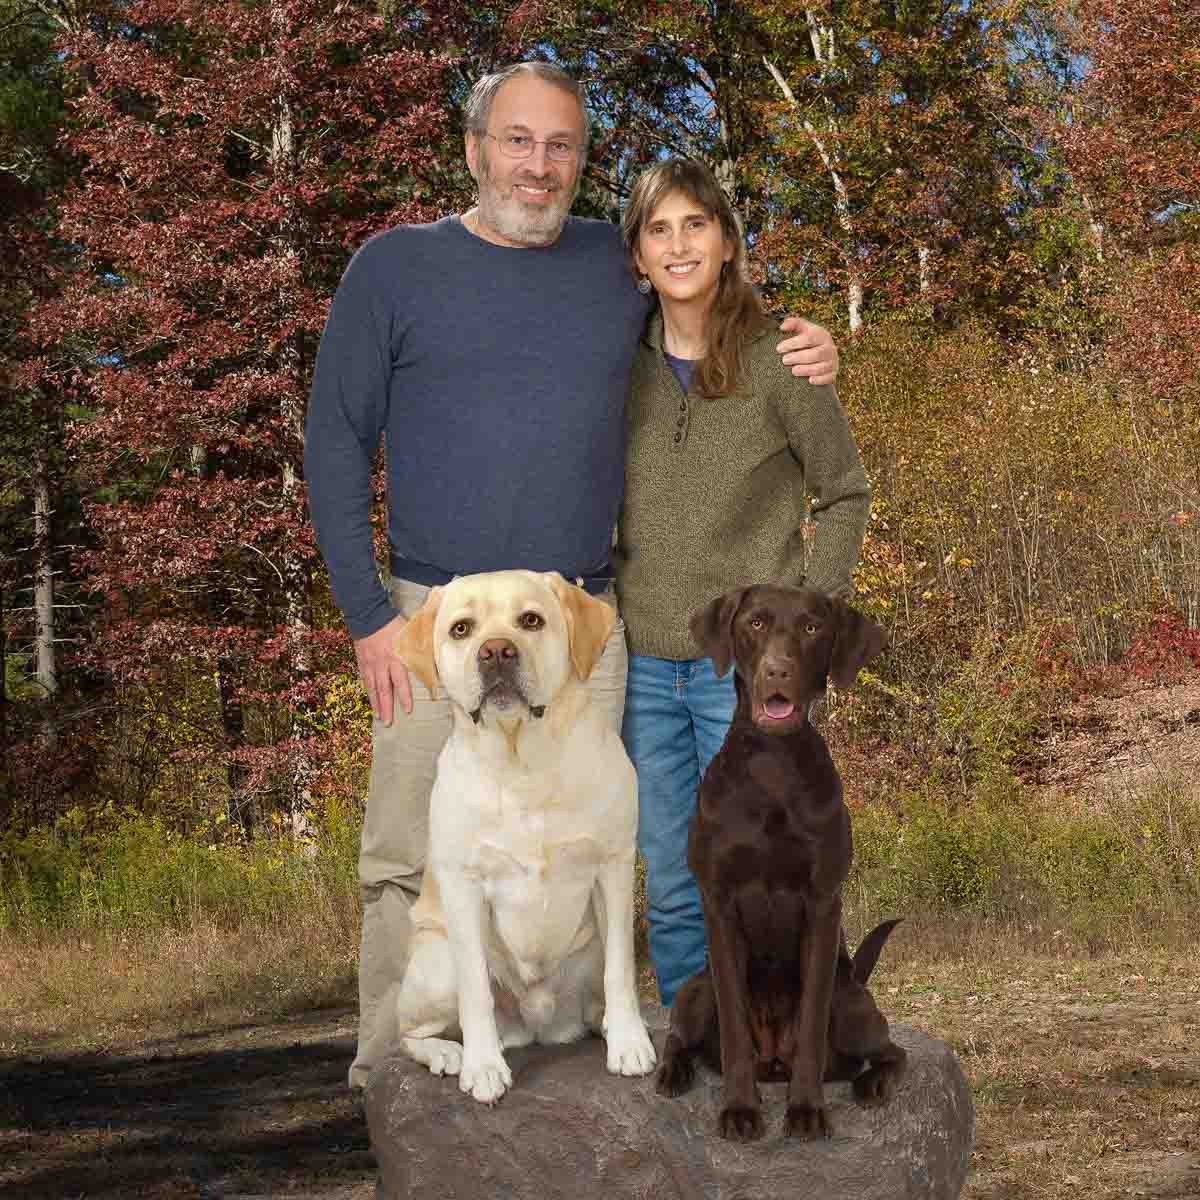 A man and woman standing with two dogs.